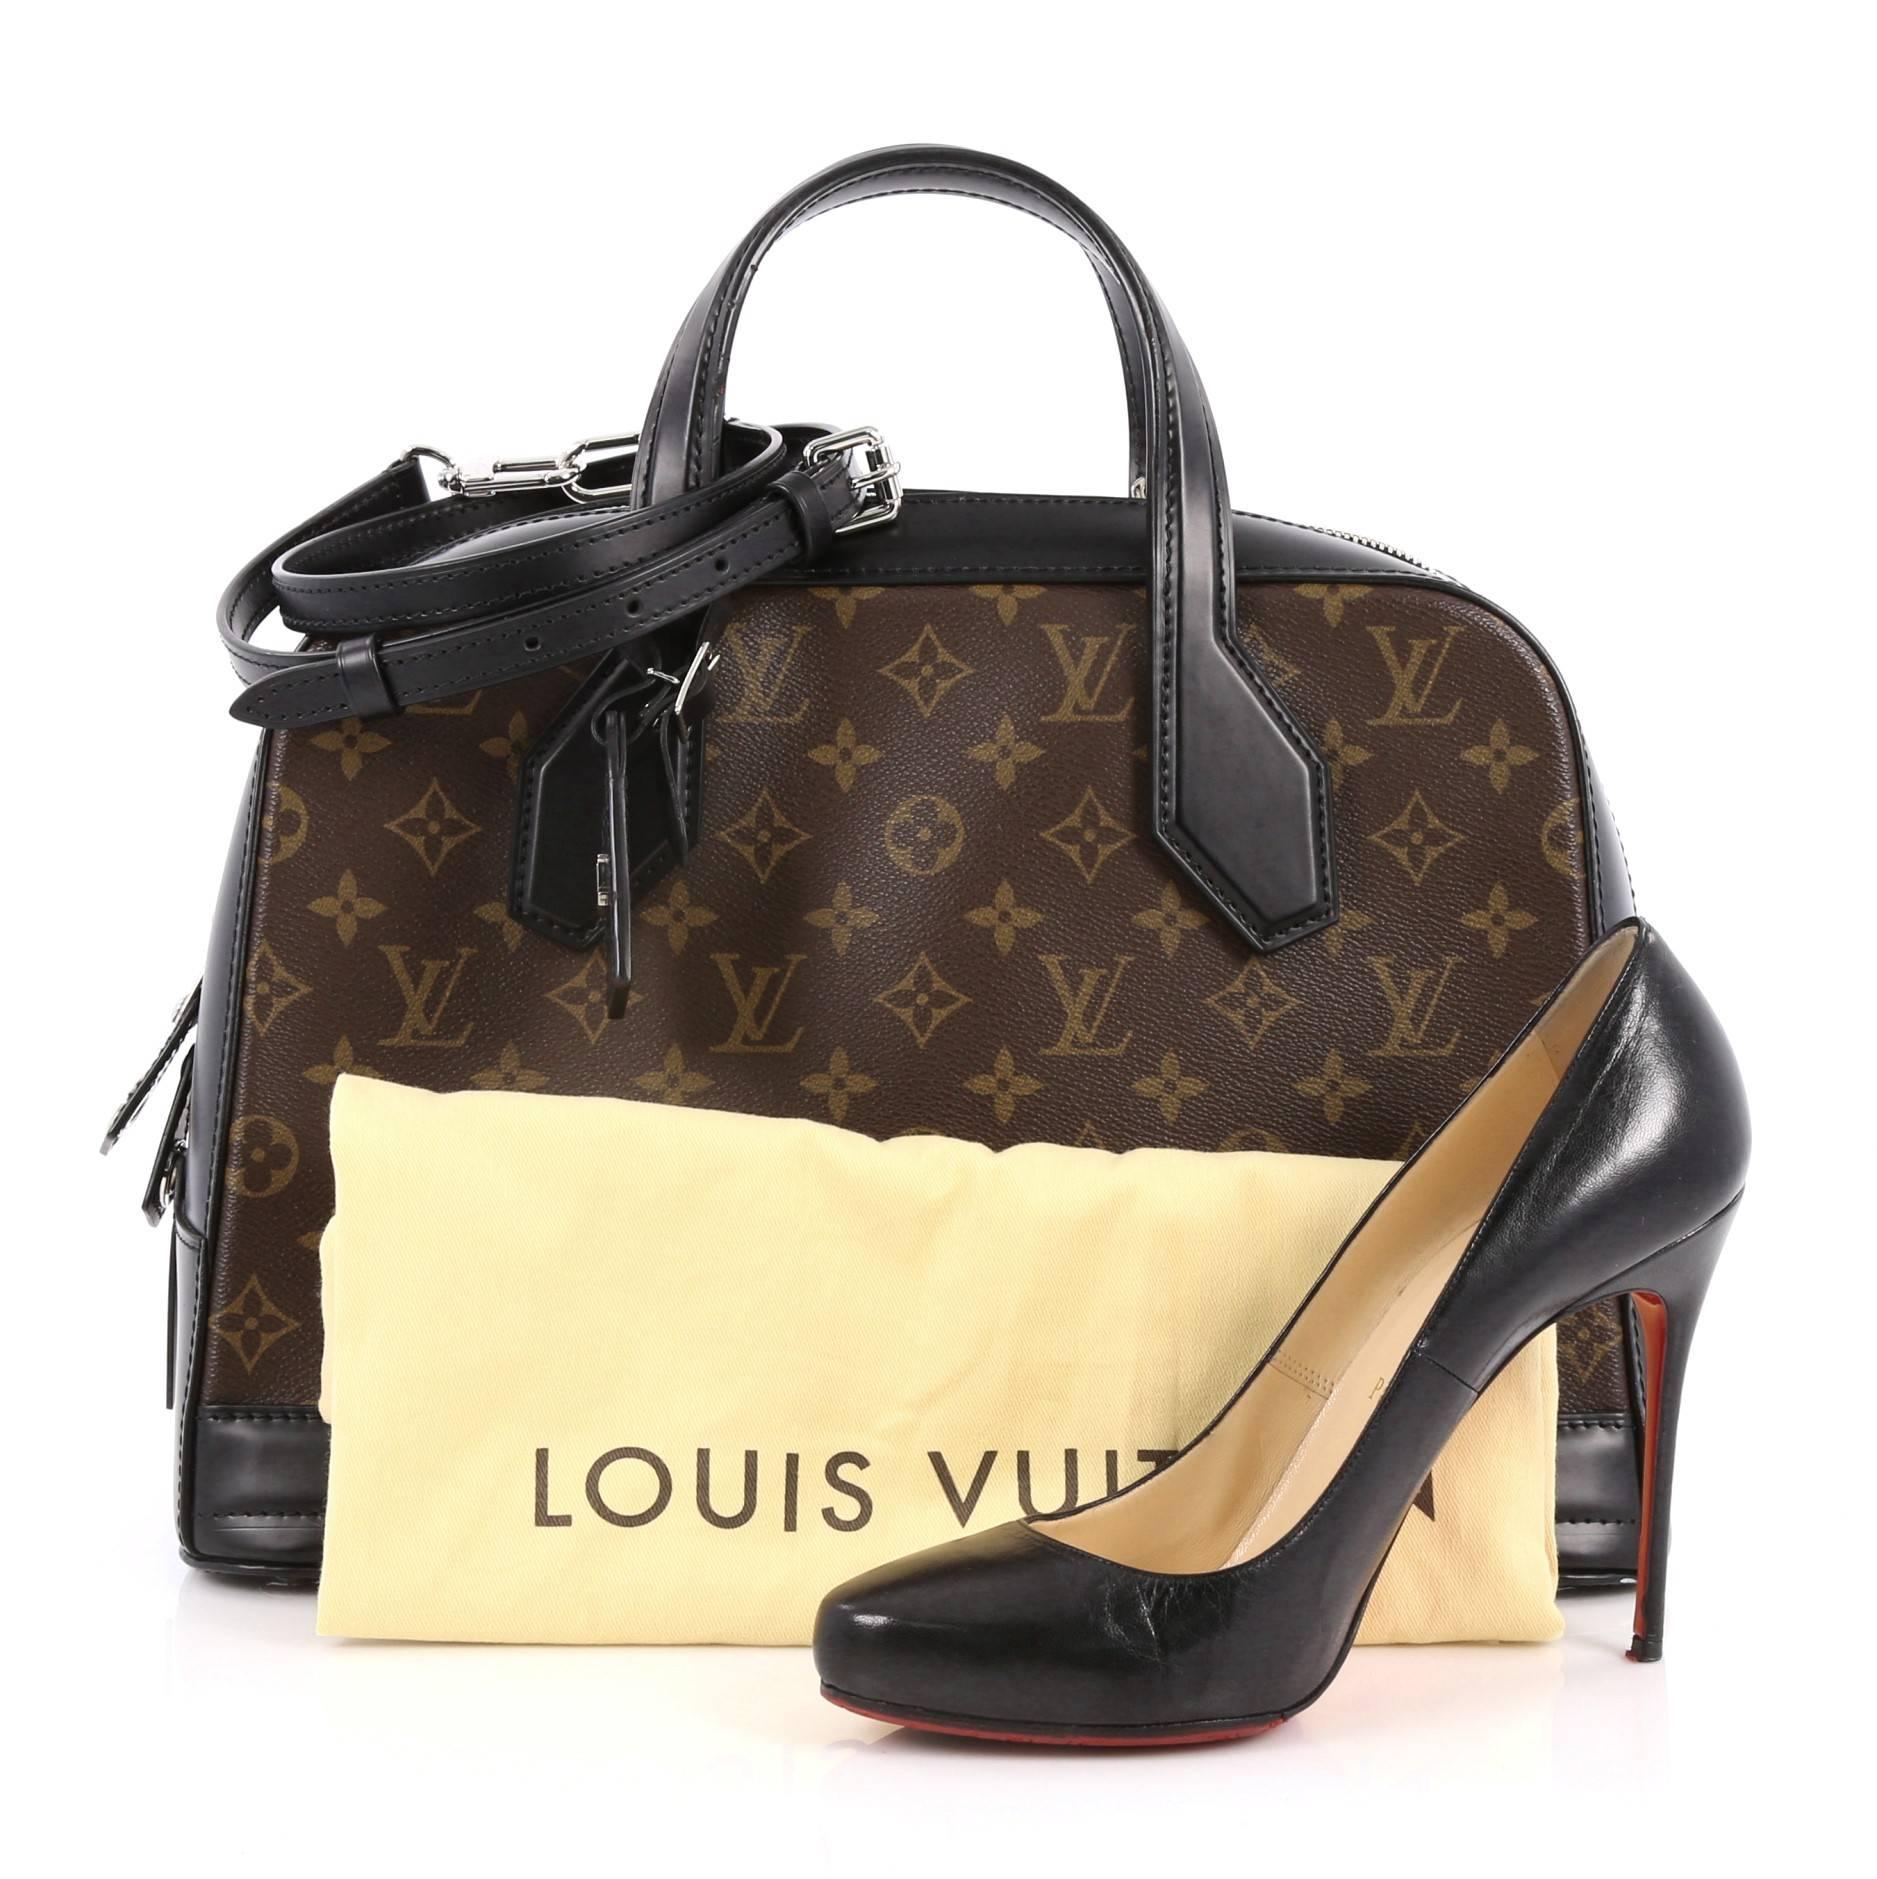 This authentic Louis Vuitton Dora Handbag Monogram Canvas and Calf Leather MM presented in the brand's Pre-Fall 2015 Collection is inspired by Gaston Vuitton's iconic squire travel bag. Crafted from brown monogram coated canvas and black leather,